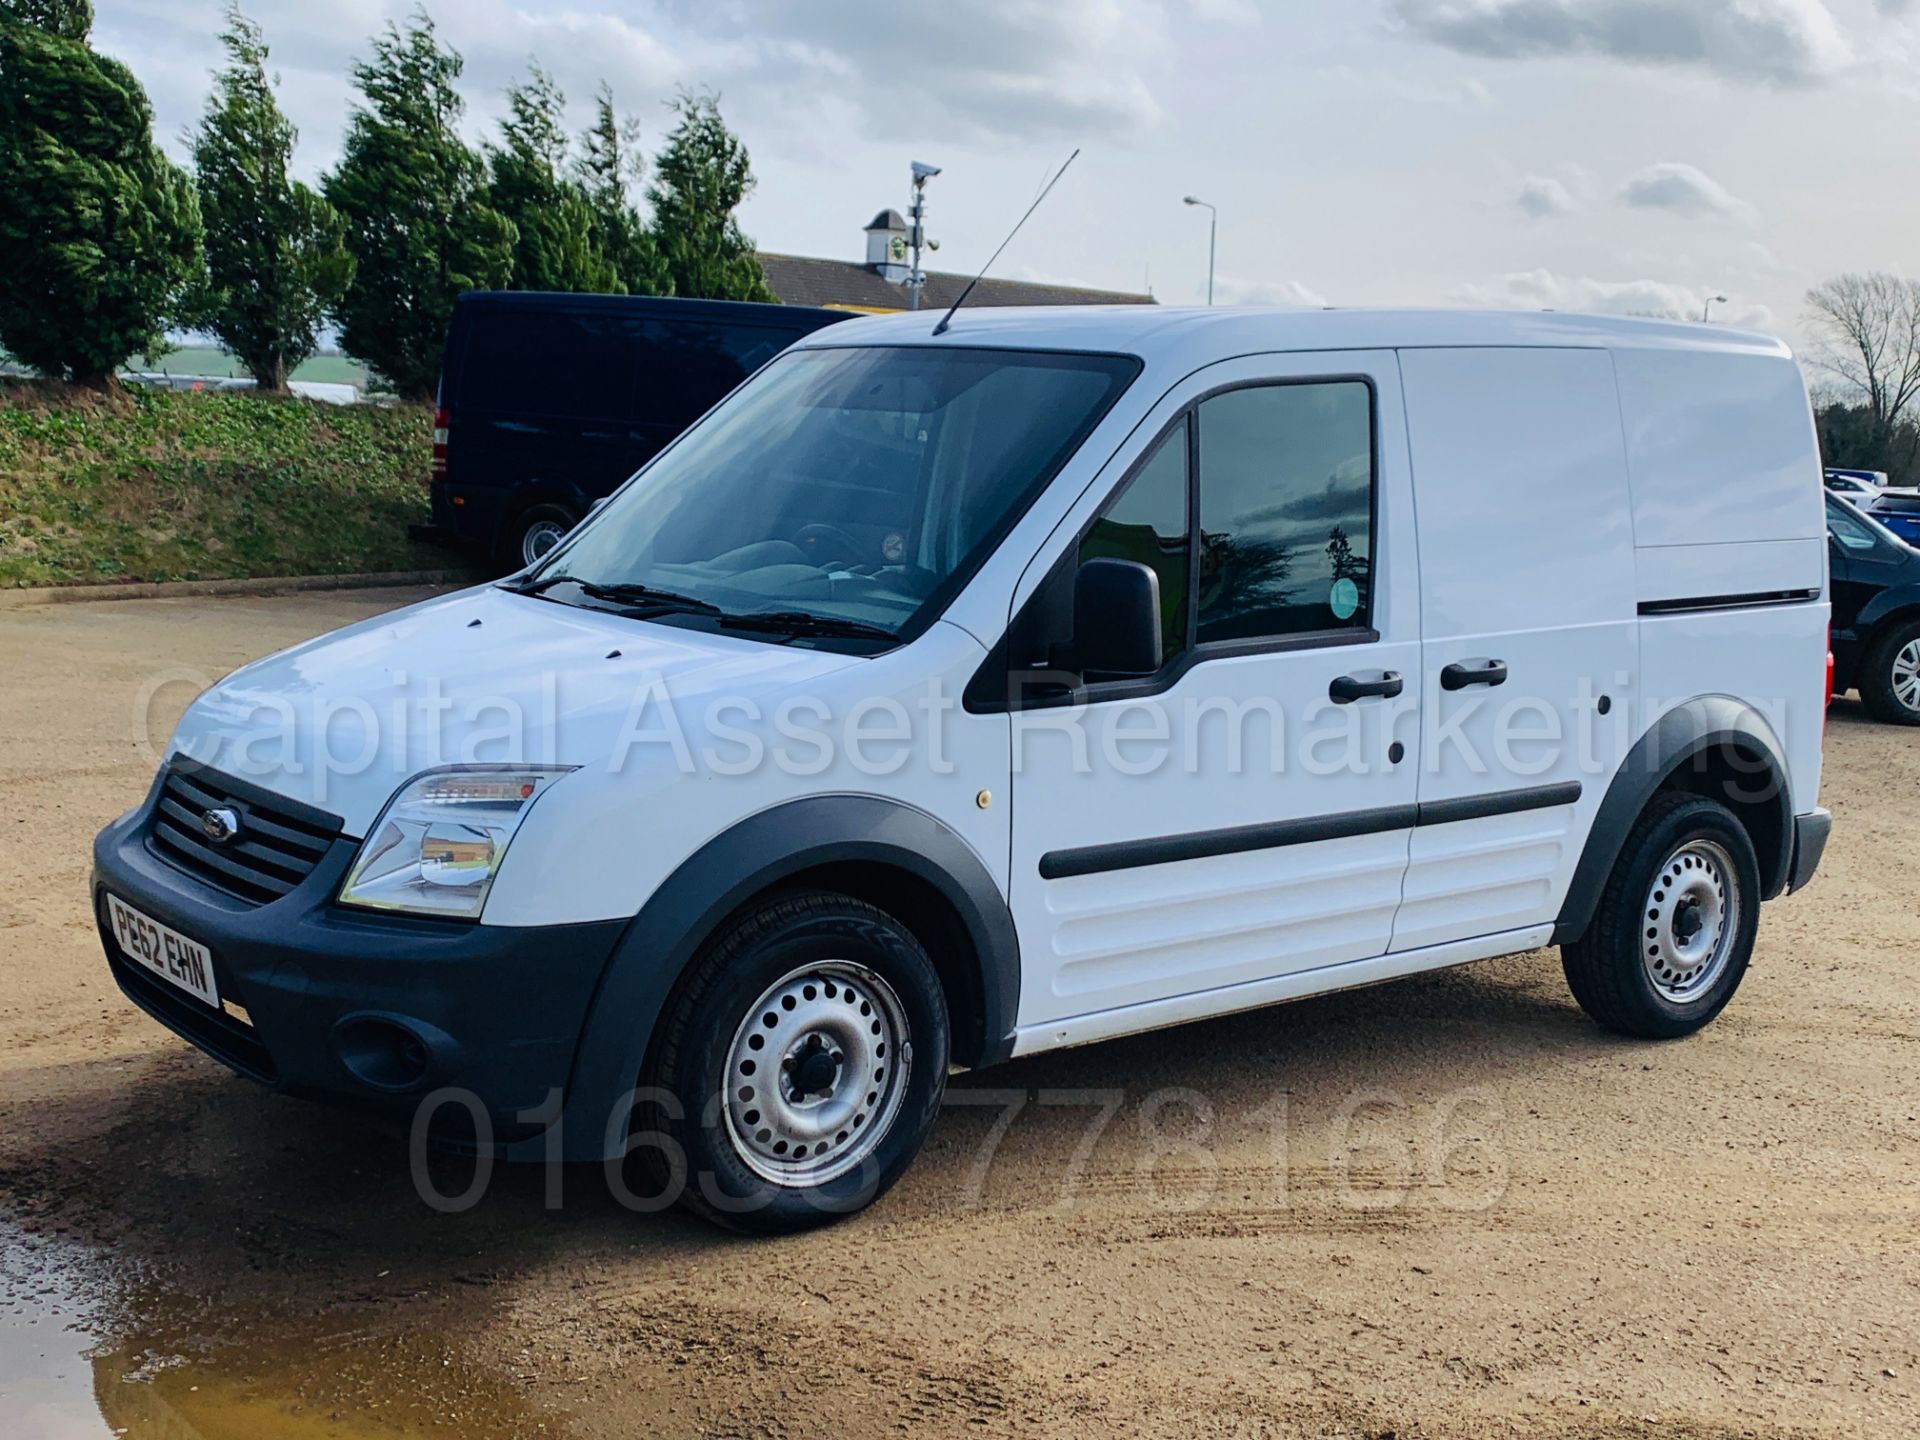 ON SALE FORD TRANSIT CONNECT T200 *LCV - PANEL VAN* (2013 MODEL) '1.8 TDCI -*LOW MILES - Image 3 of 30